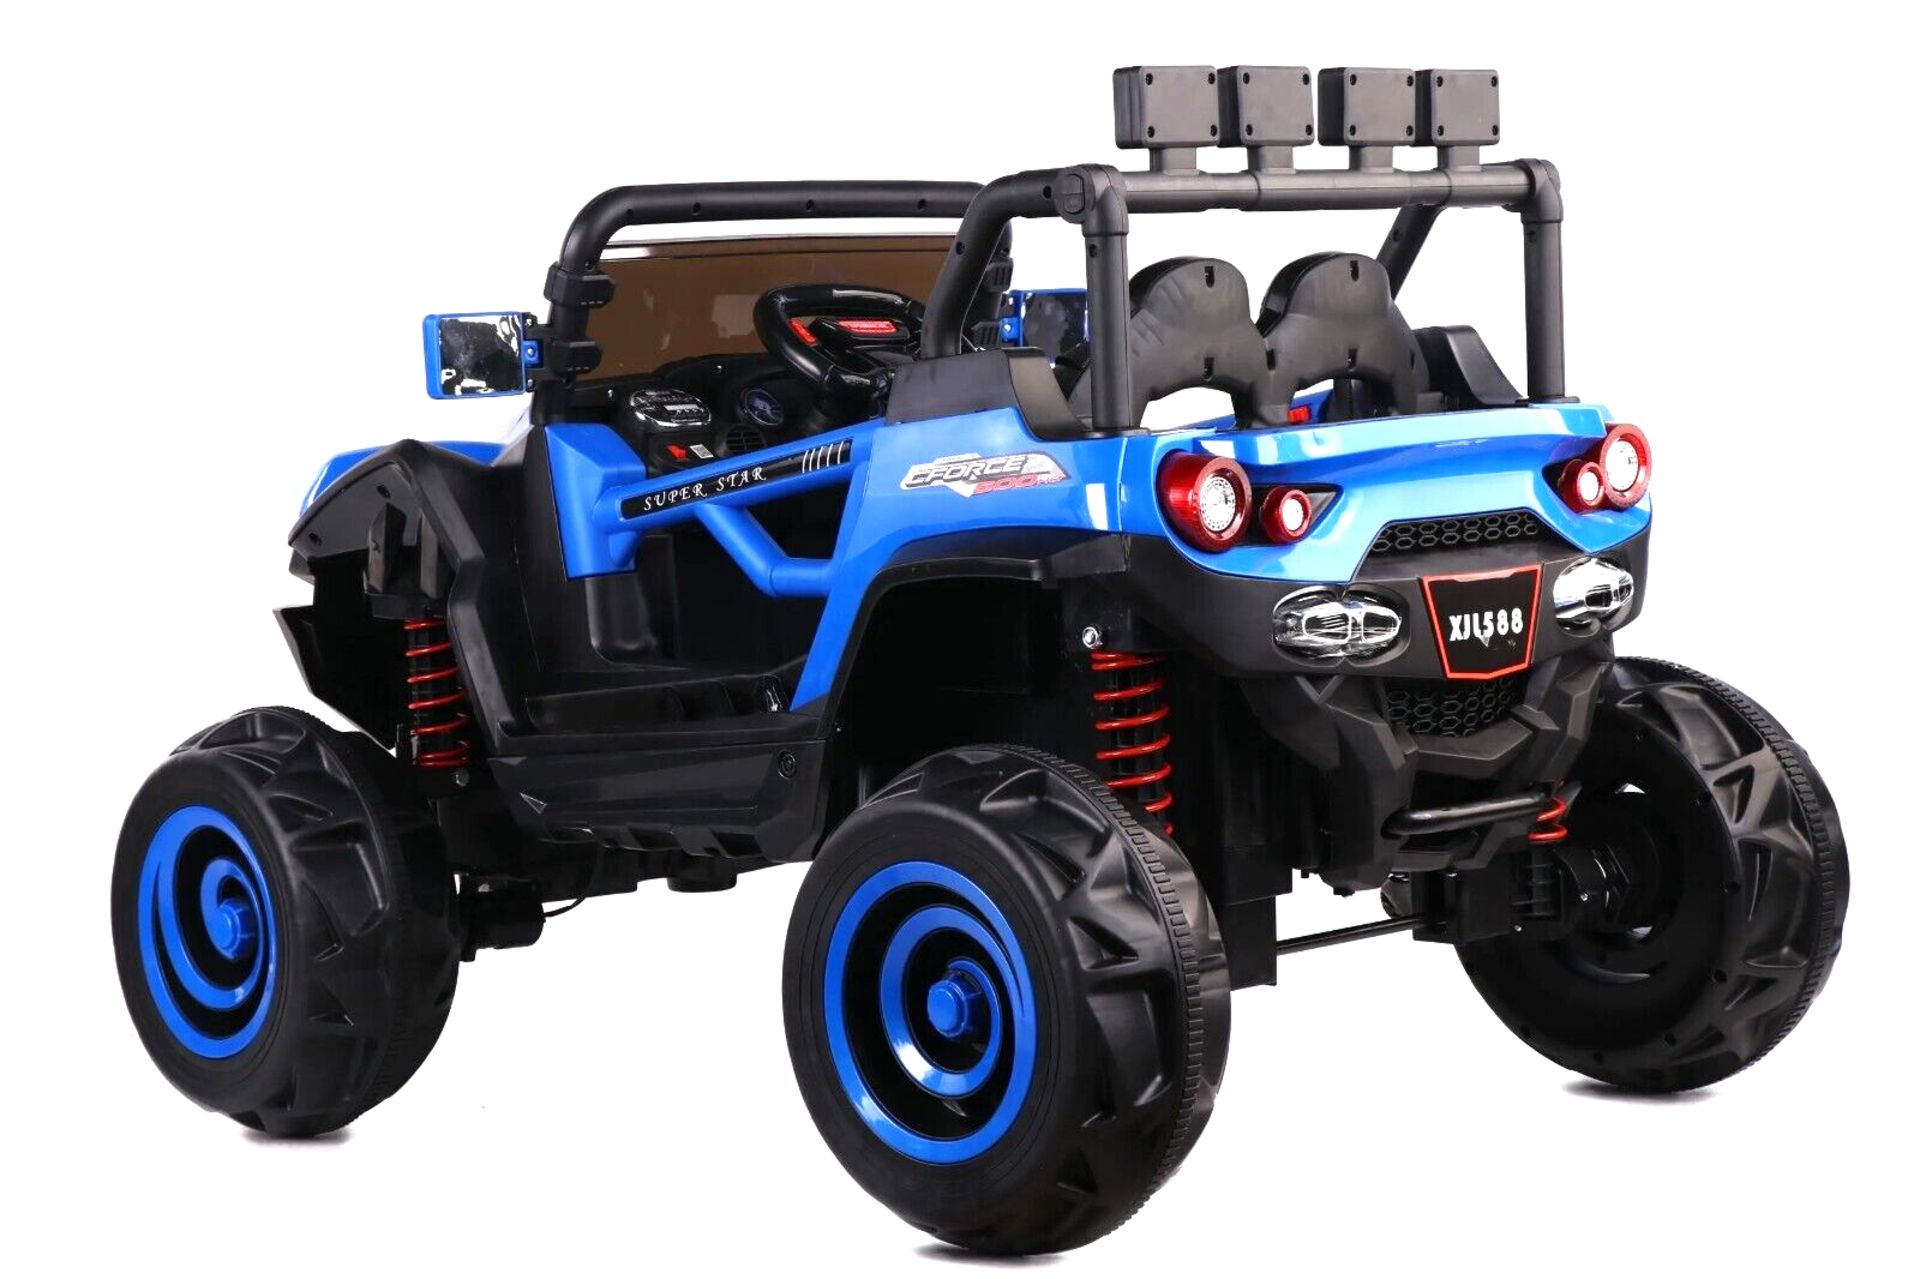 BLUE 4X4 ATV/UTV KIDS BUGGY JEEP ELECTRIC CAR WITH REMOTE BRAND NEW BOXED - Image 5 of 5